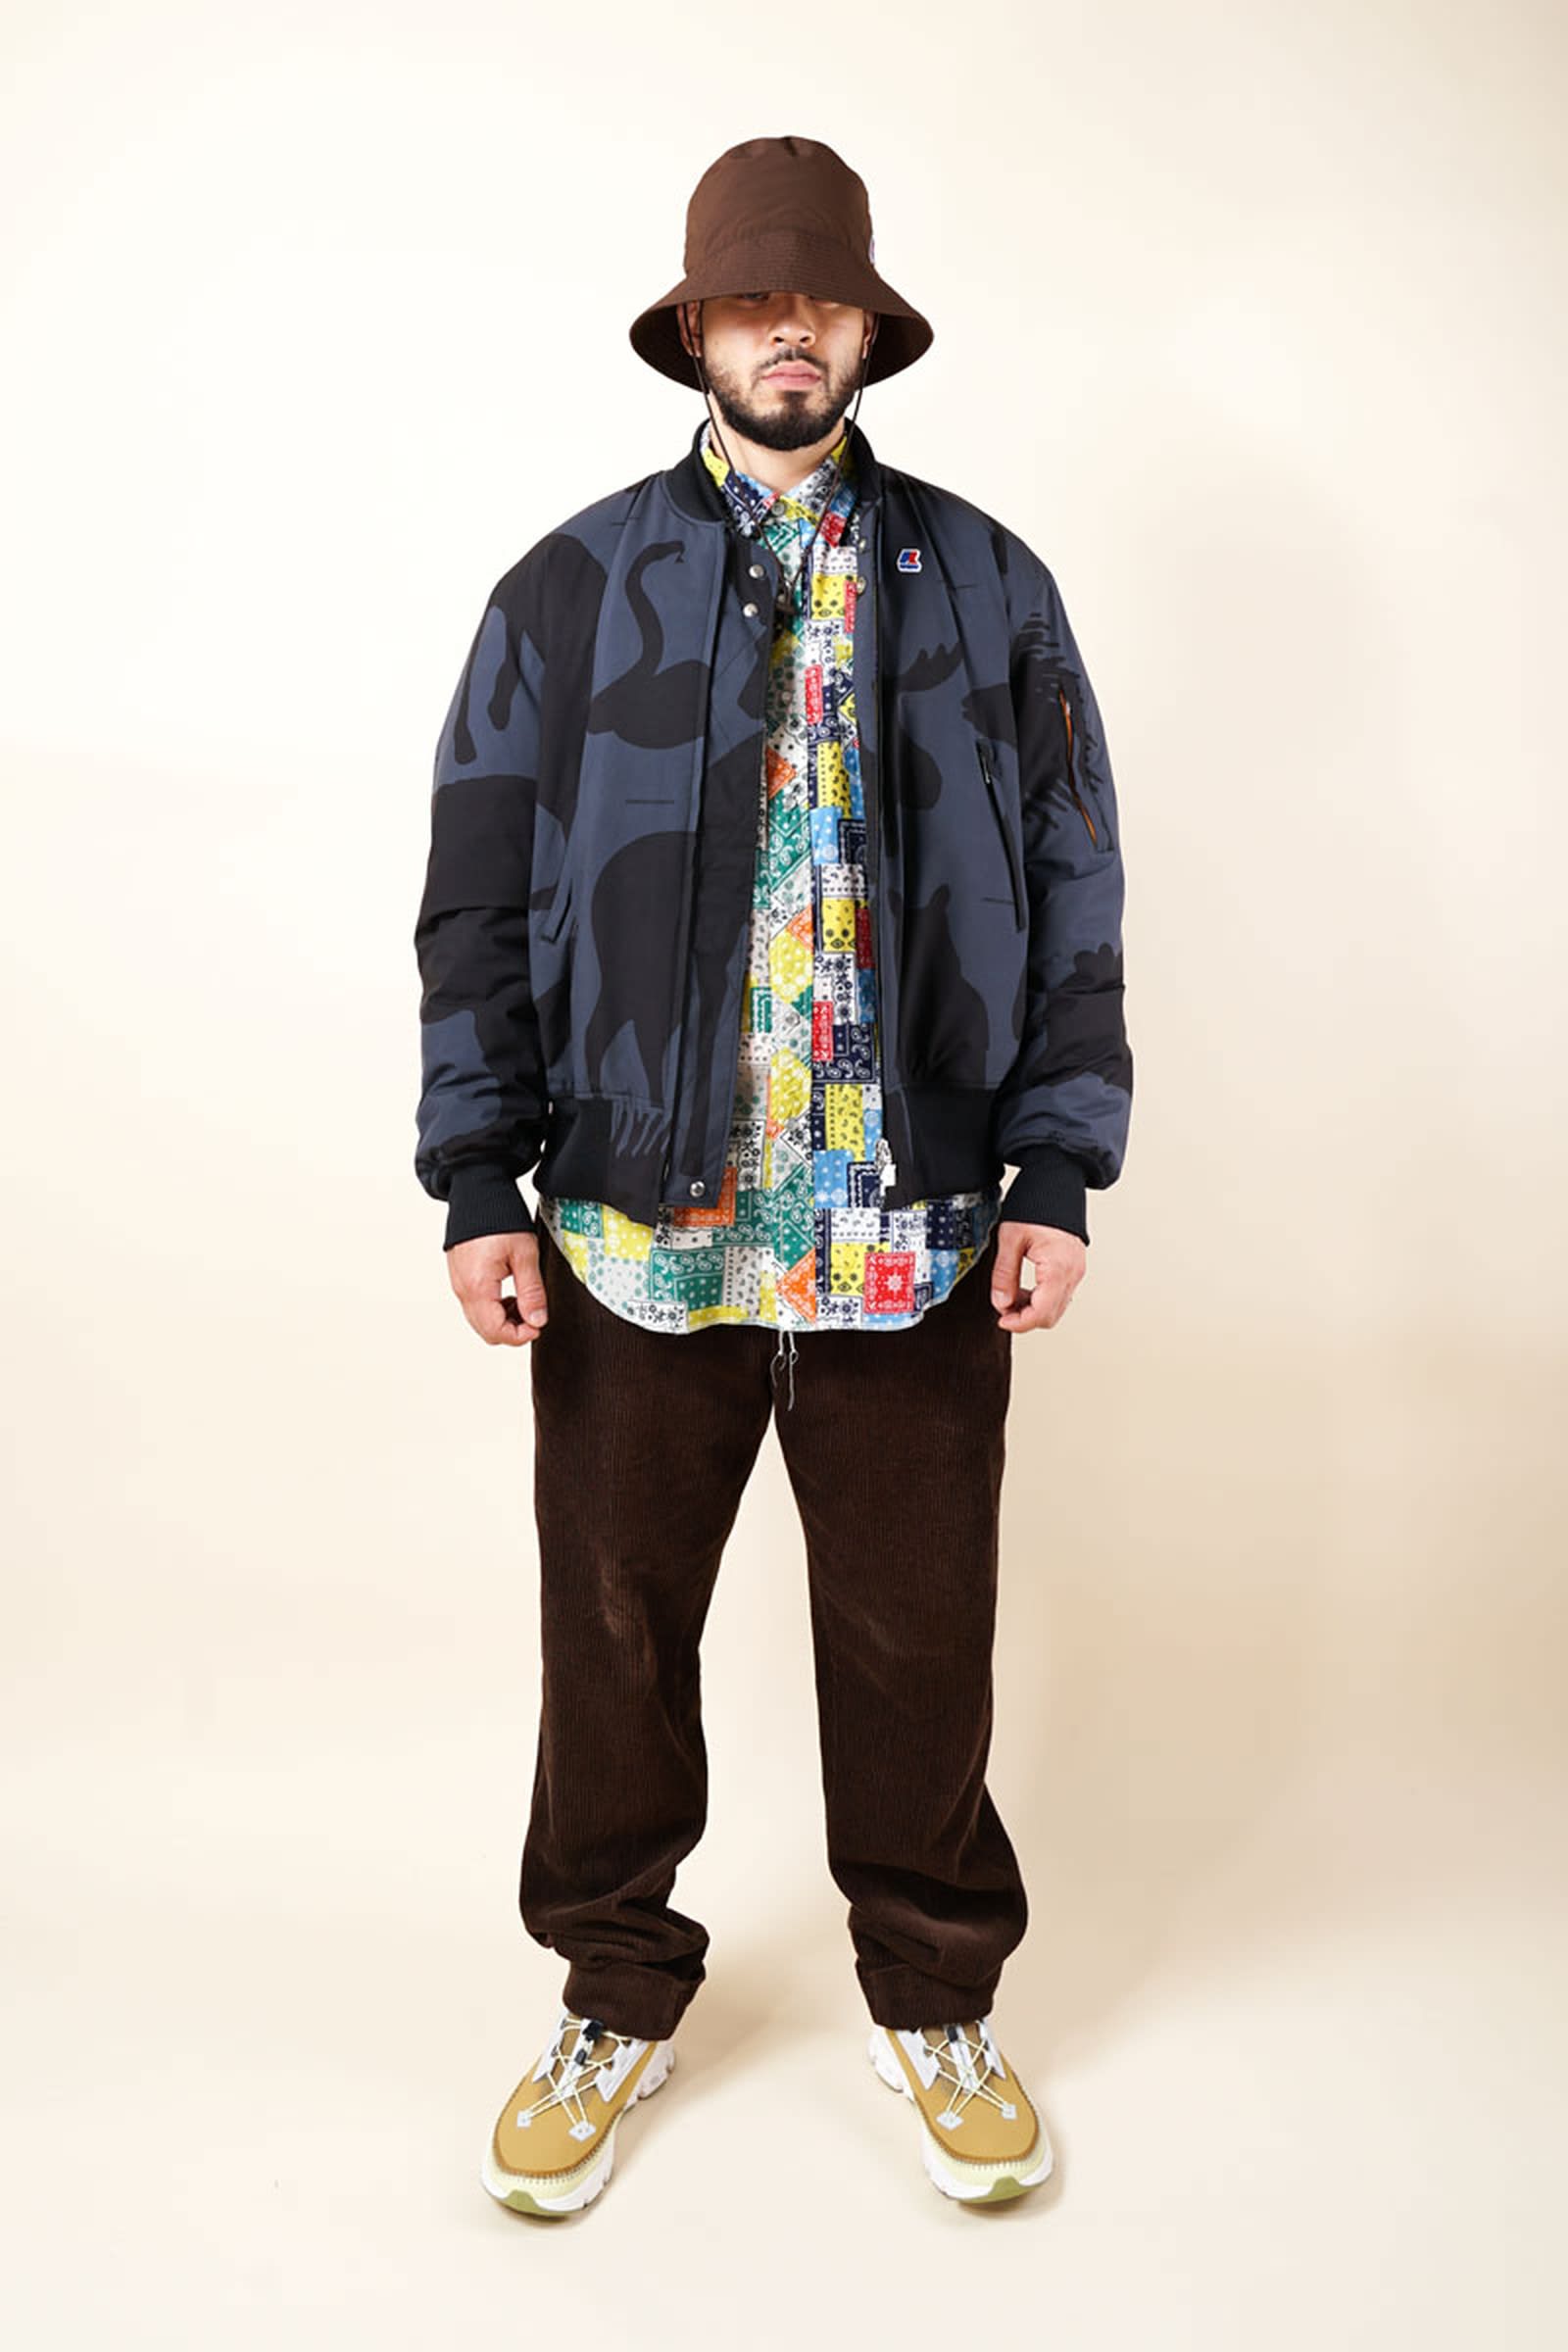 Engineered Garments x K-Way Link Up For 4-Piece Capsule 